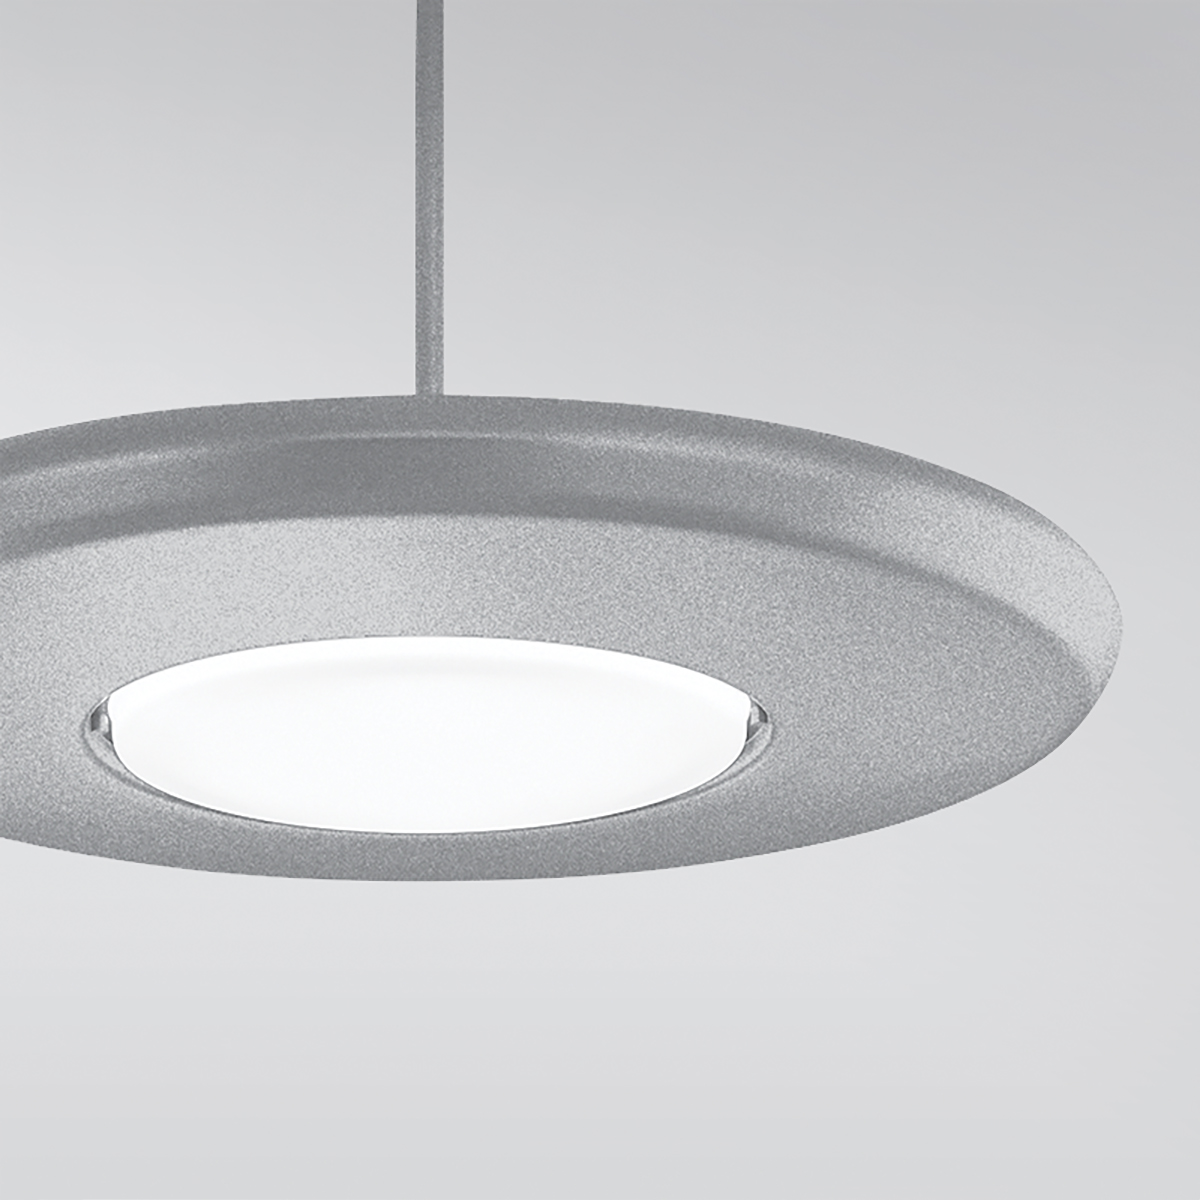 A round, disc-shaped pendant with a luminous downlight diffuser in the center cropped